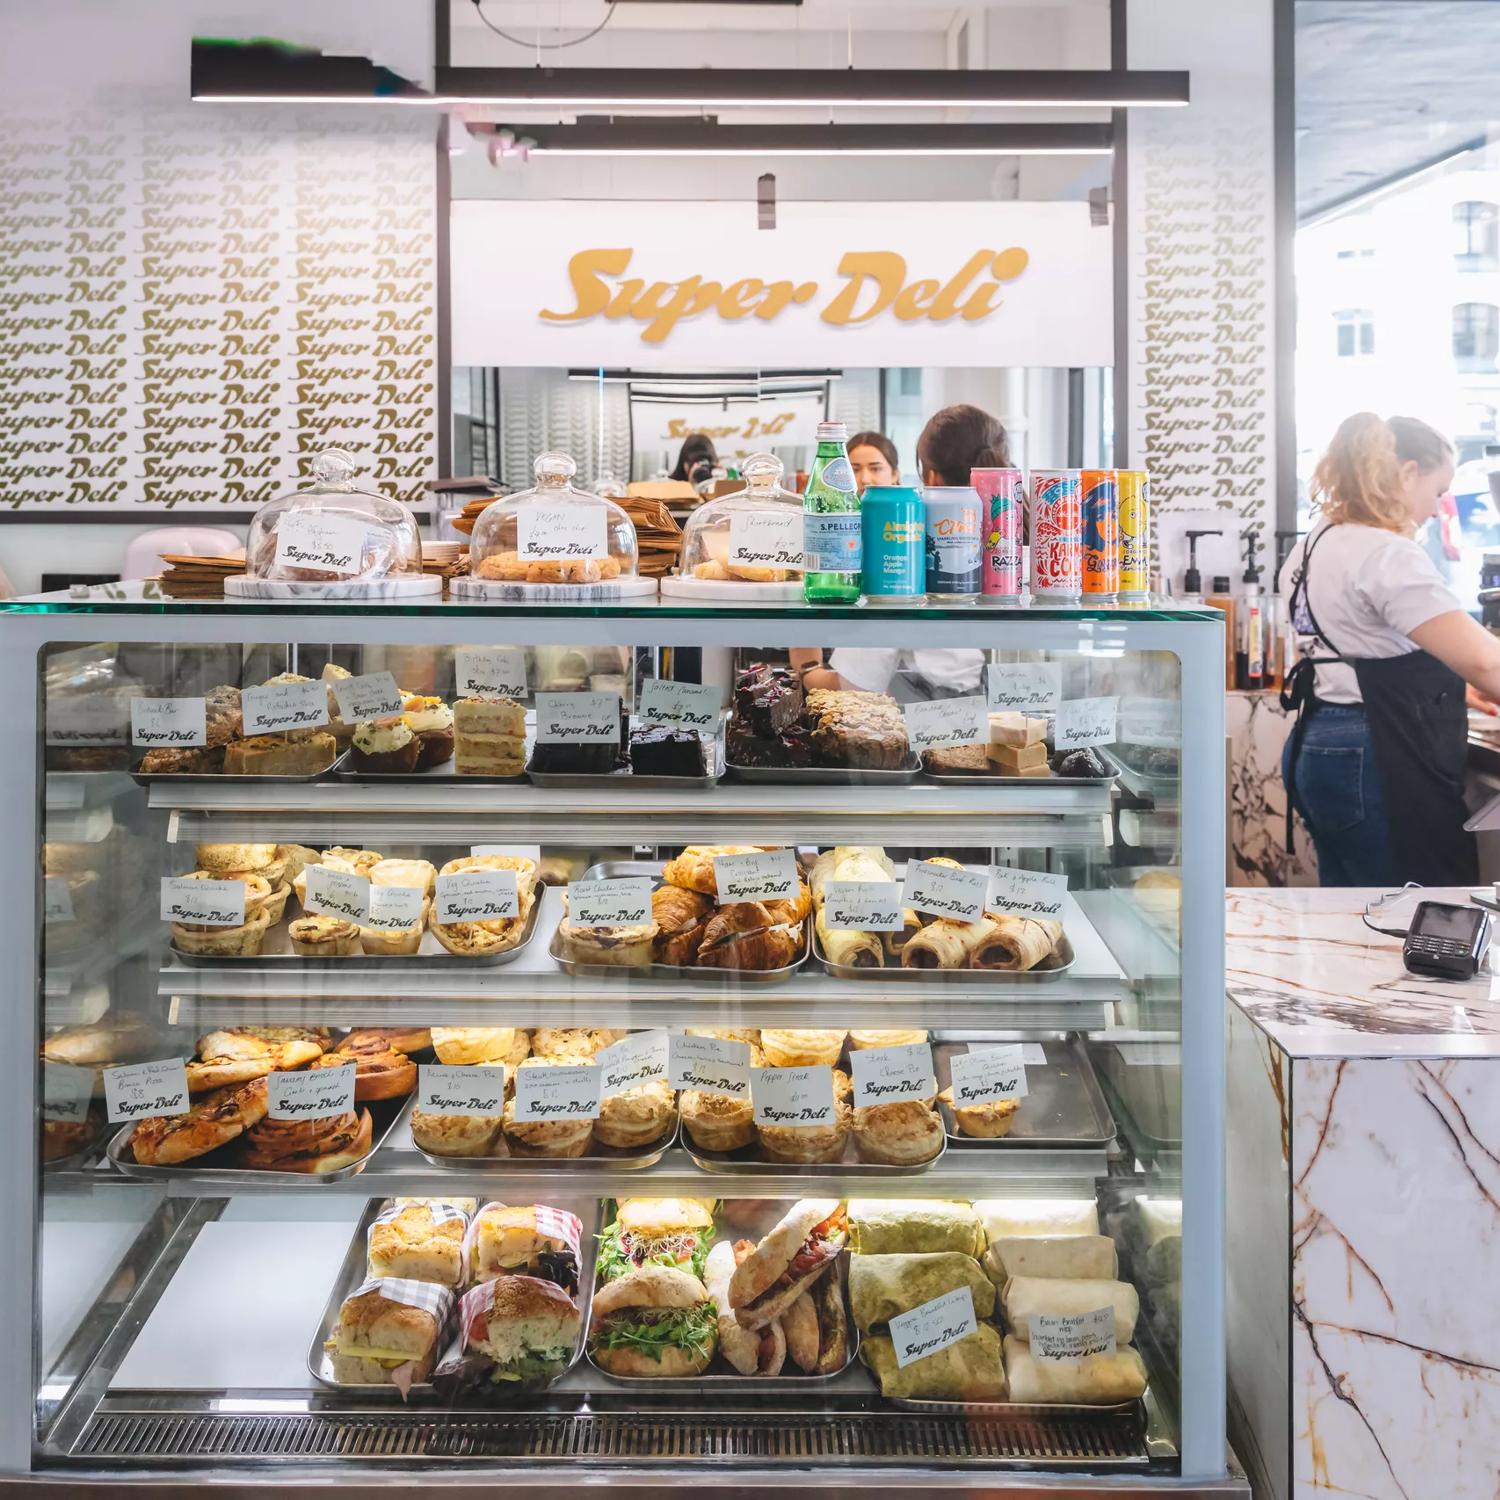 Inside Super Deli café, two workers are behind the counter and there is a glass case with sandwiched and baked goods on display.